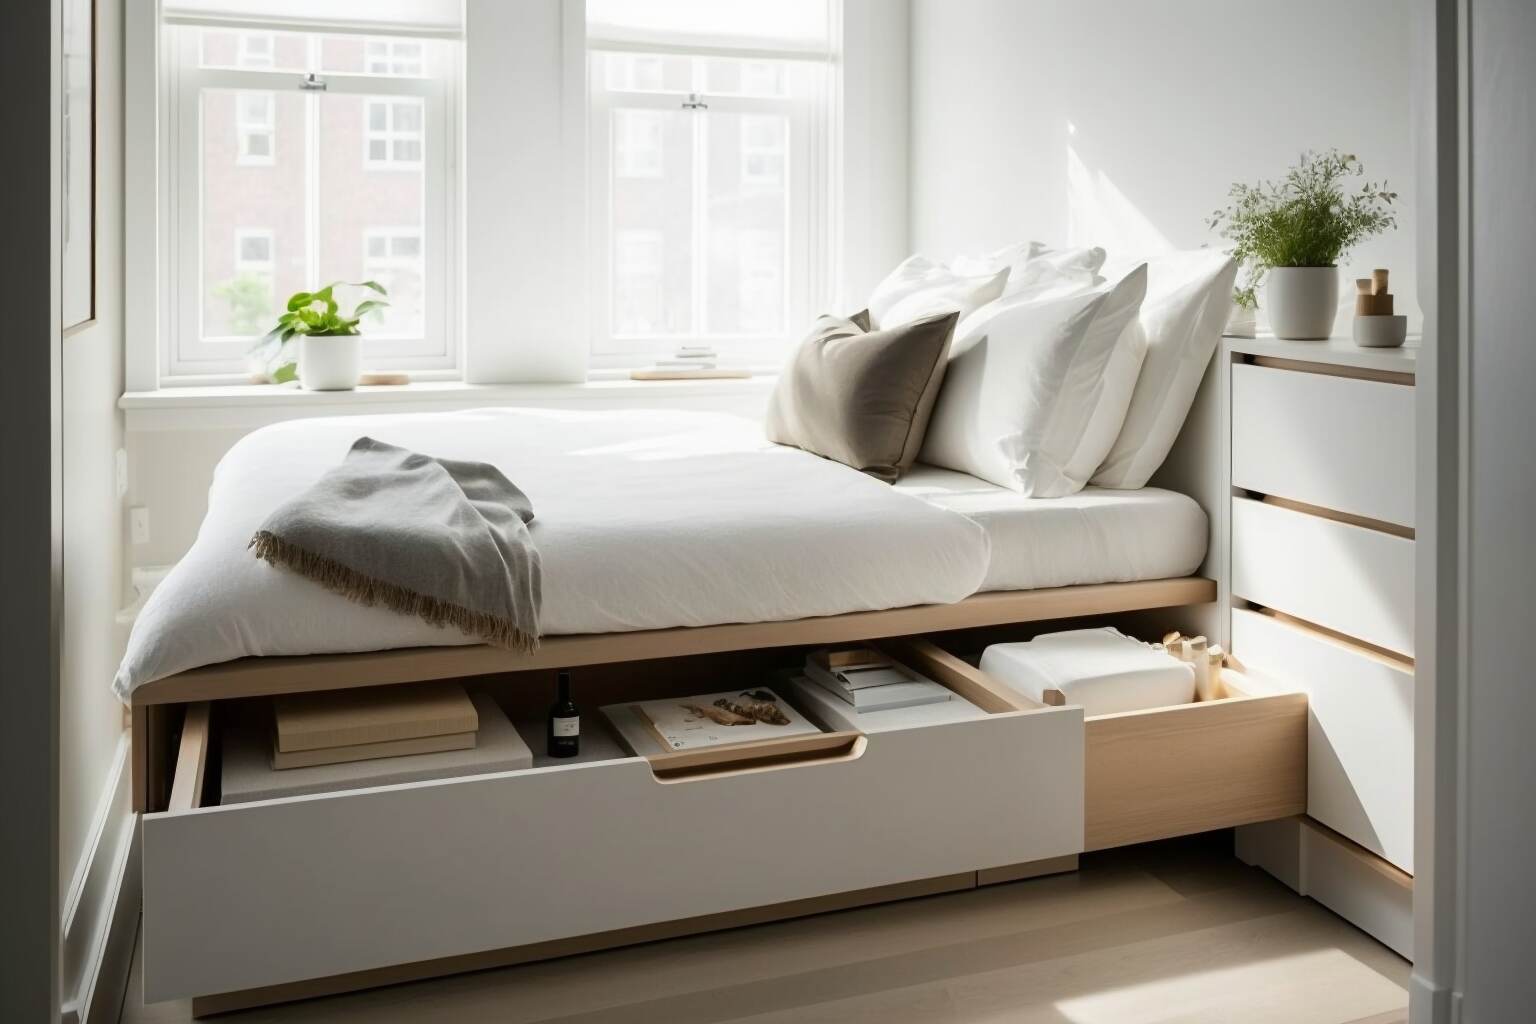 A Bed With Built In Storage Compartments Underneath